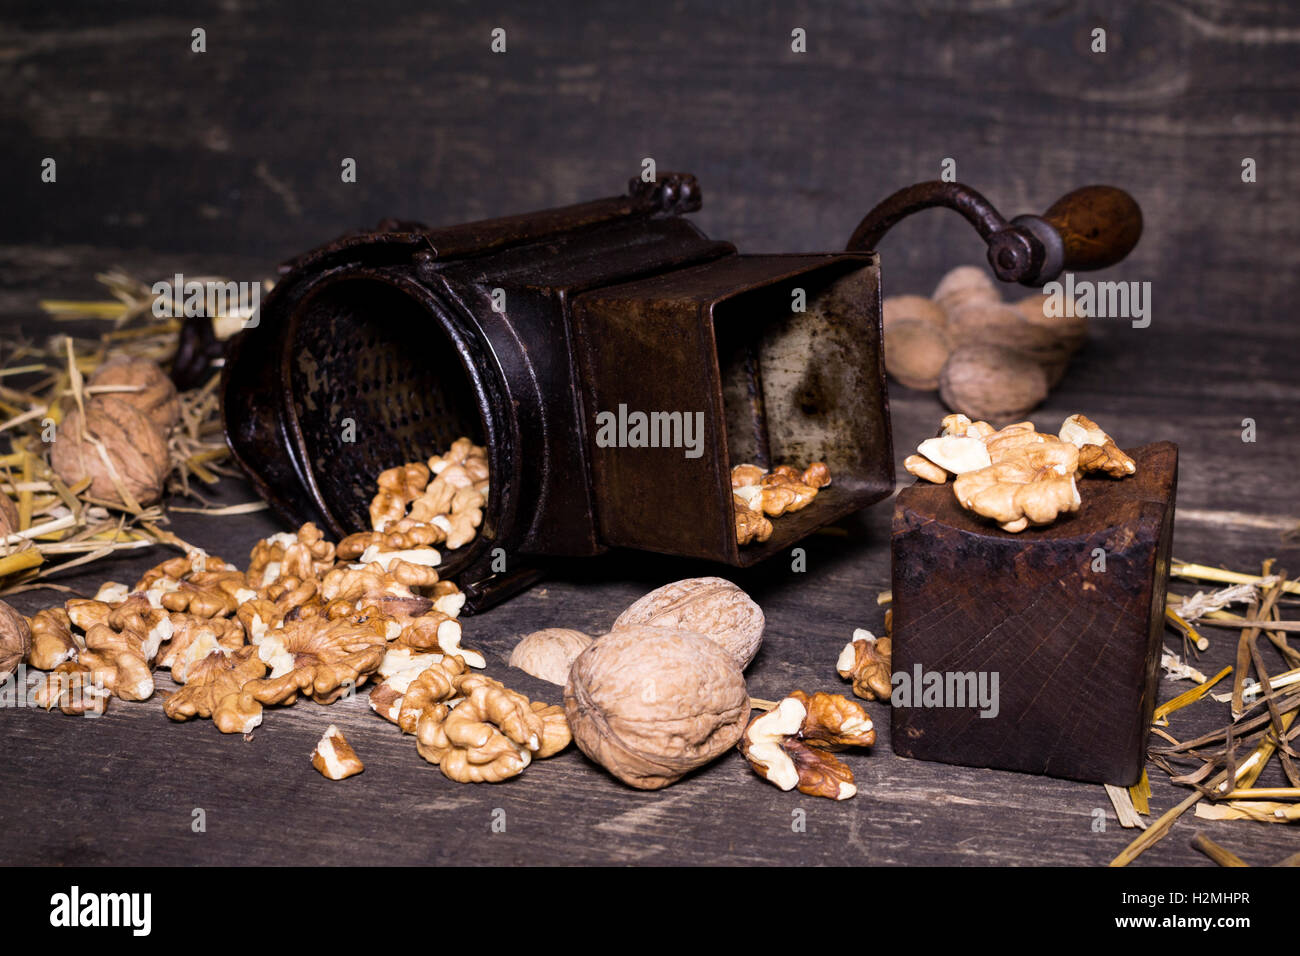 https://c8.alamy.com/comp/H2MHPR/wallnuts-and-hand-walnuts-grinder-on-a-wooden-surface-H2MHPR.jpg